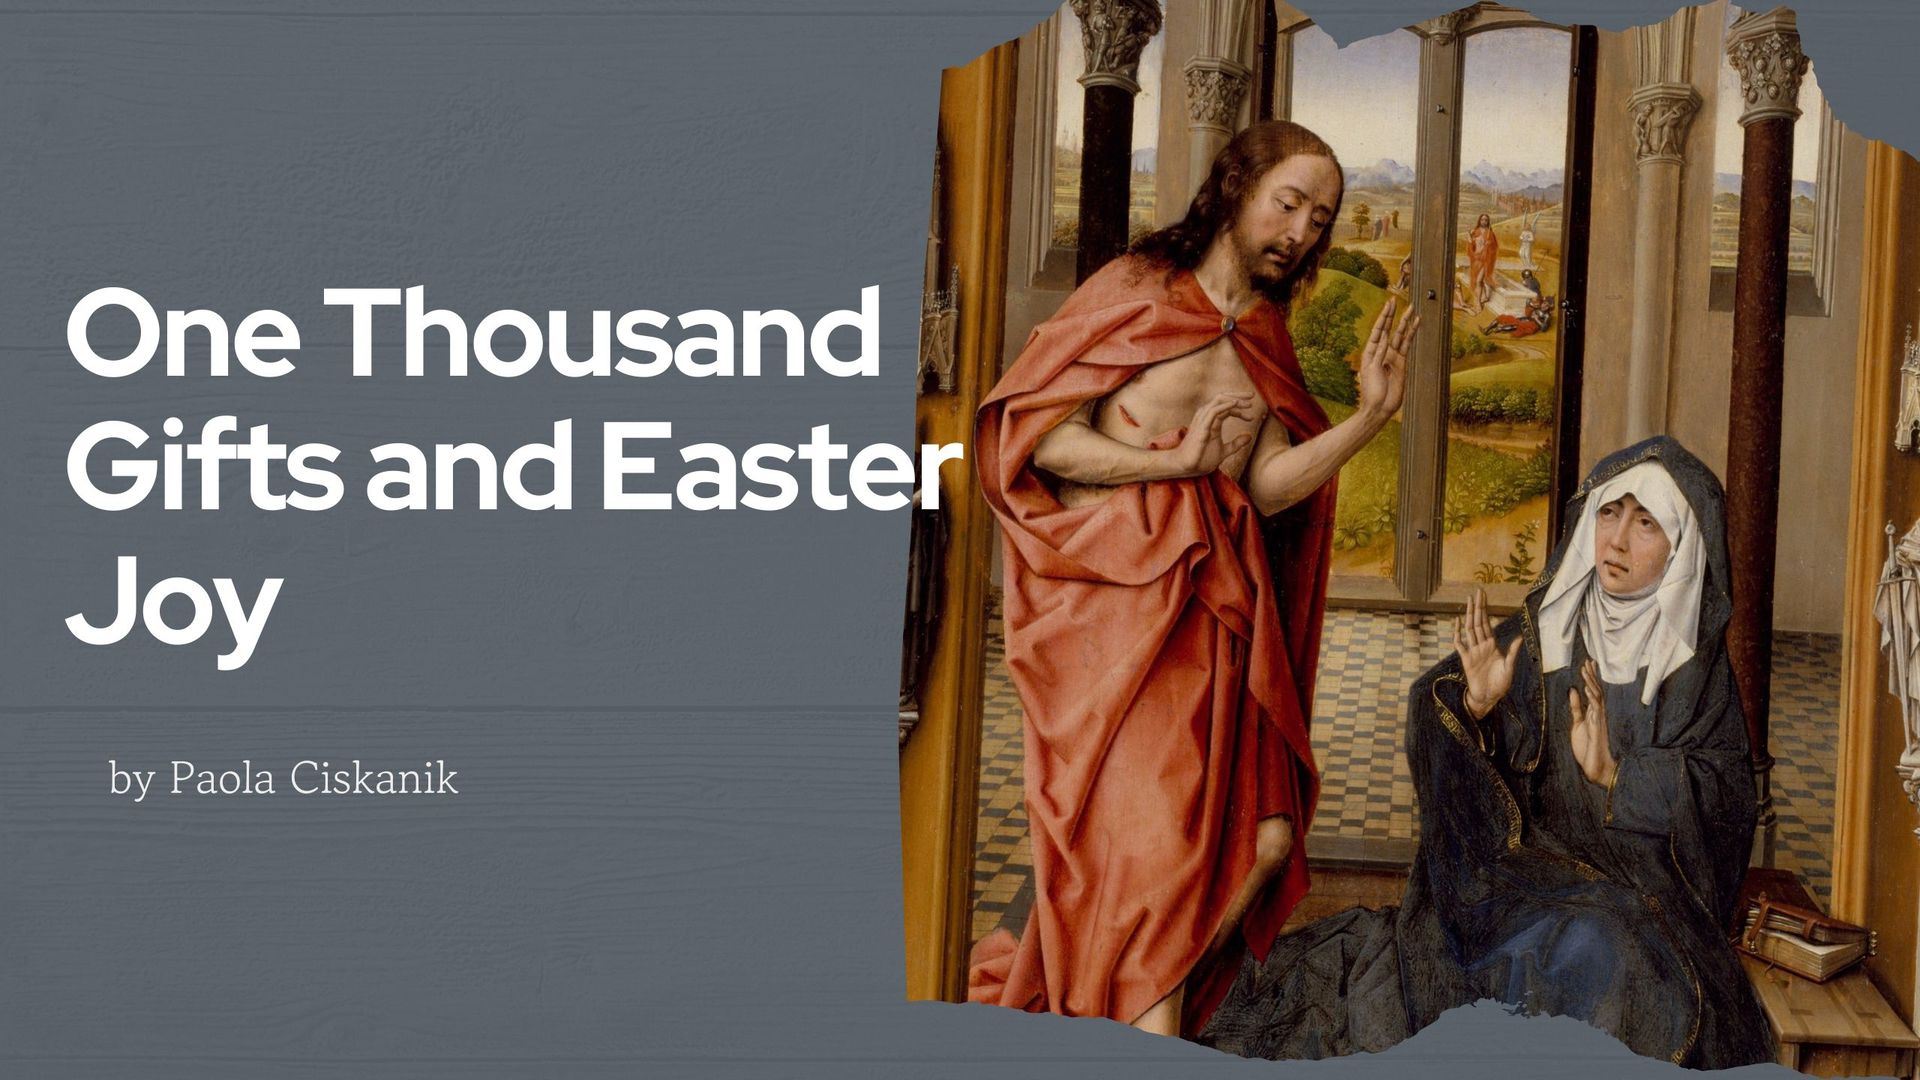 One Thousand Gifts & Easter Joy